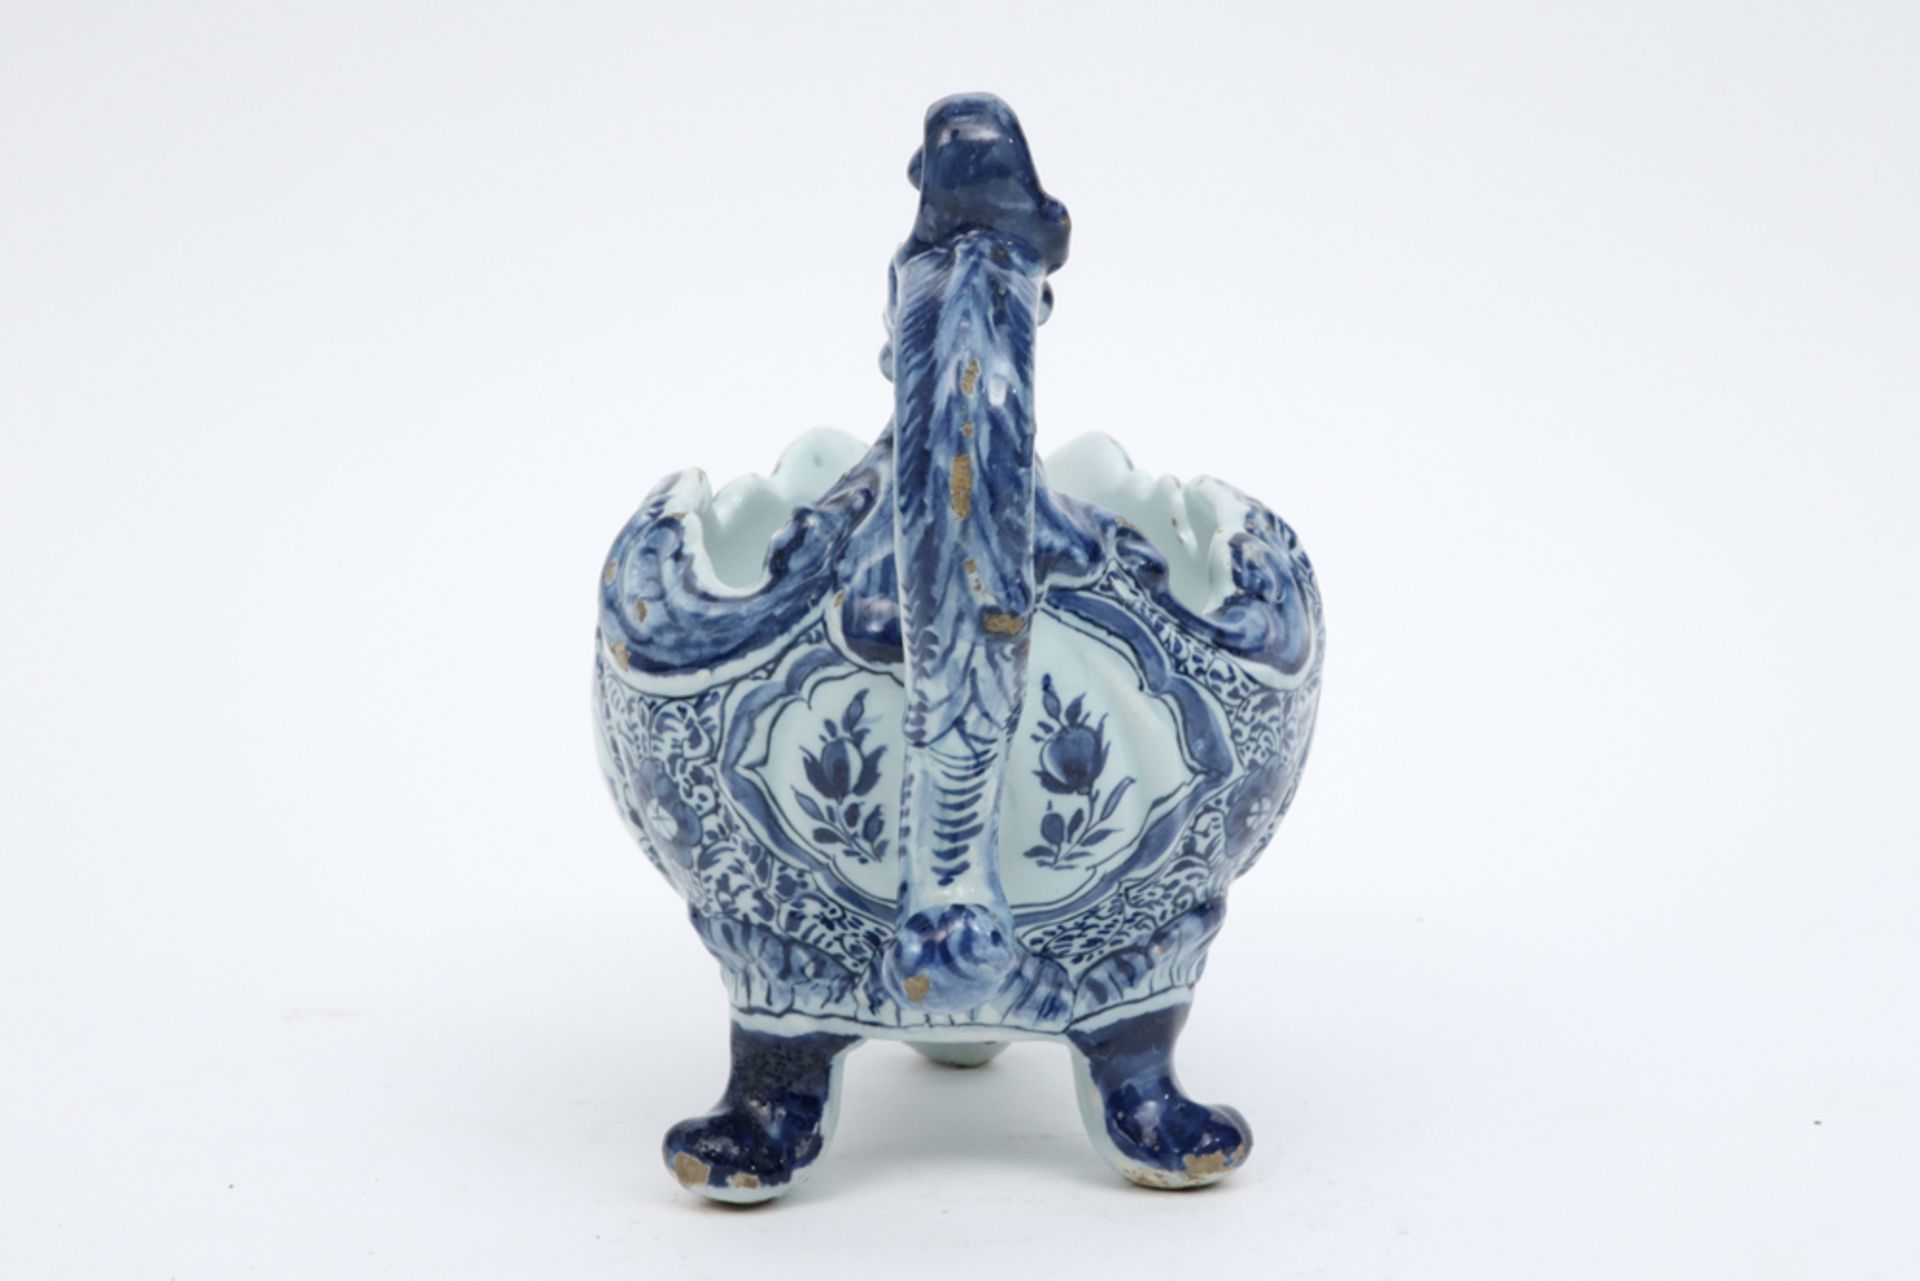 18th Cent. sauce boat in marked ceramic from Delft with a blue-white decor || Achttiende eeuwse - Bild 4 aus 4